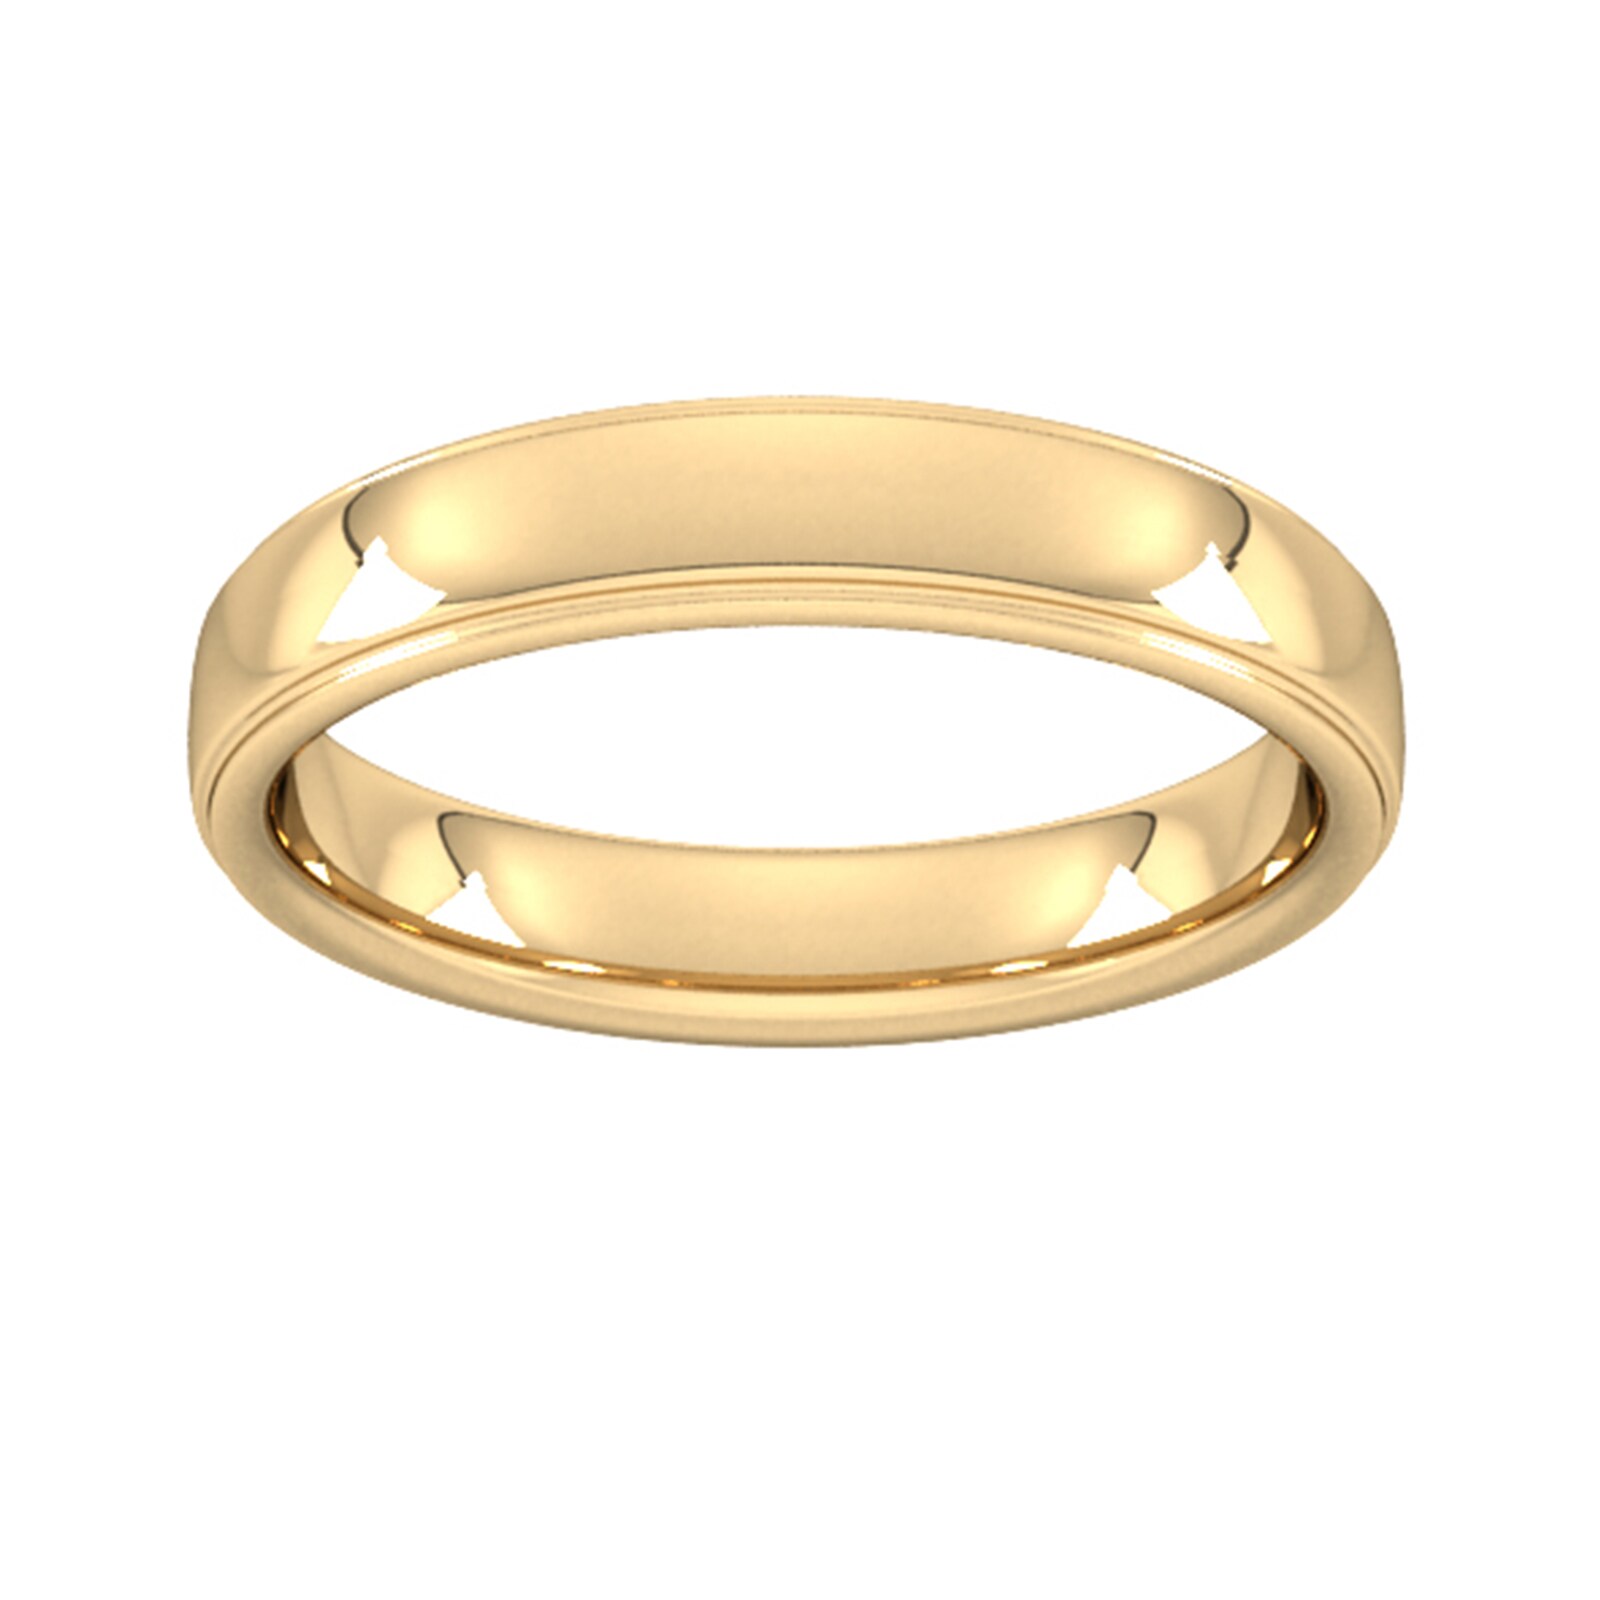 4mm Slight Court Extra Heavy Polished Finish With Grooves Wedding Ring In 18 Carat Yellow Gold - Ring Size P